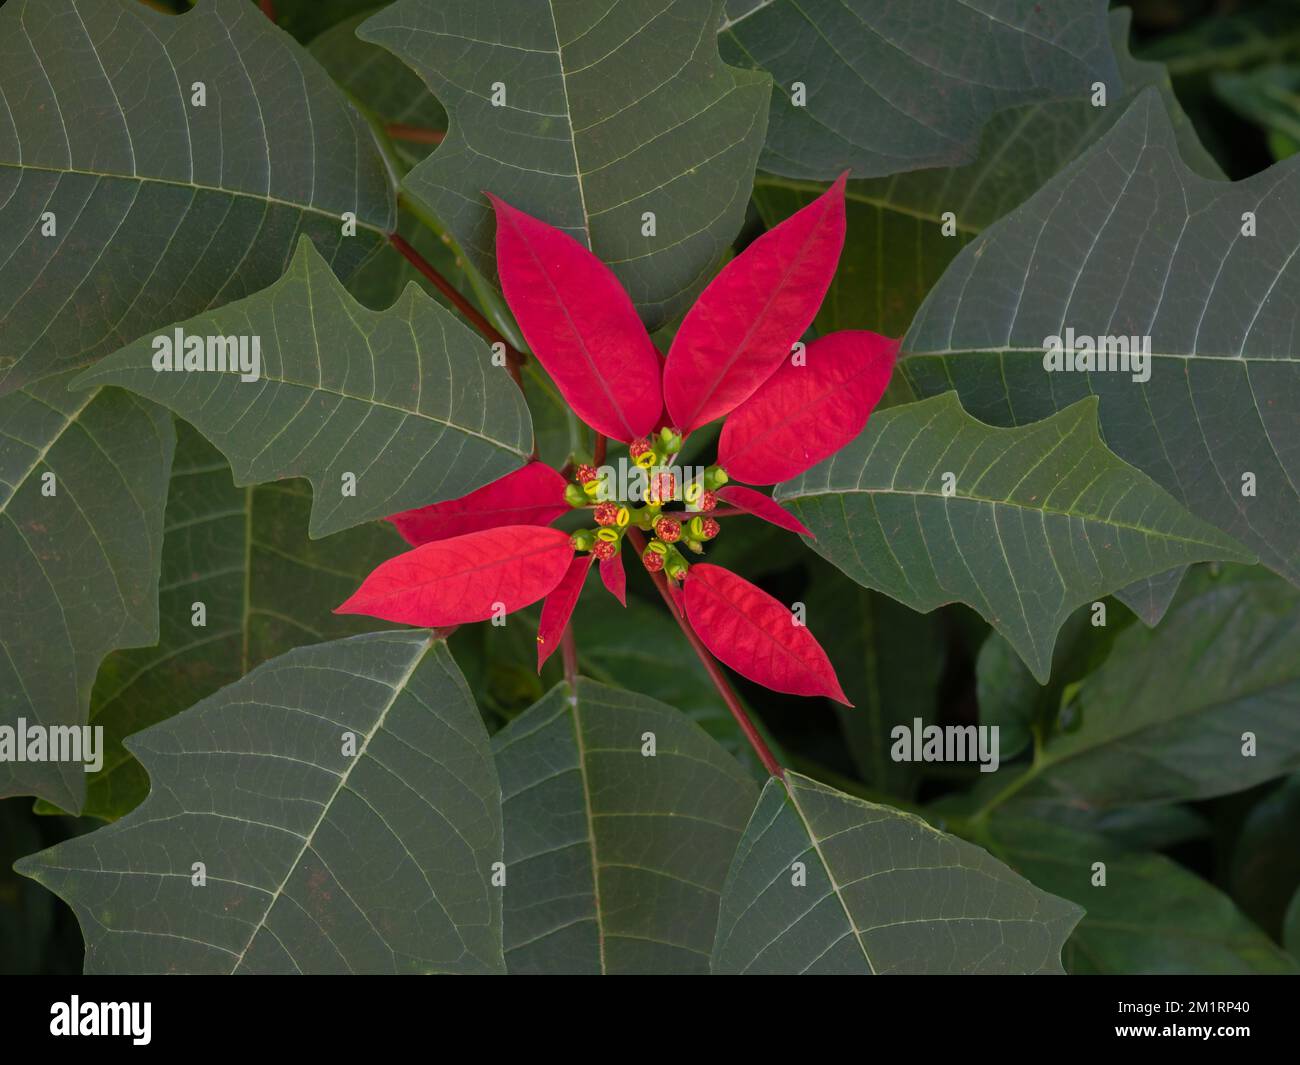 Closeup view of colorful poinsettia or euphorbia pulcherrima shrub blooming in the wild with bright red bracts, a classic Christmas season plant Stock Photo